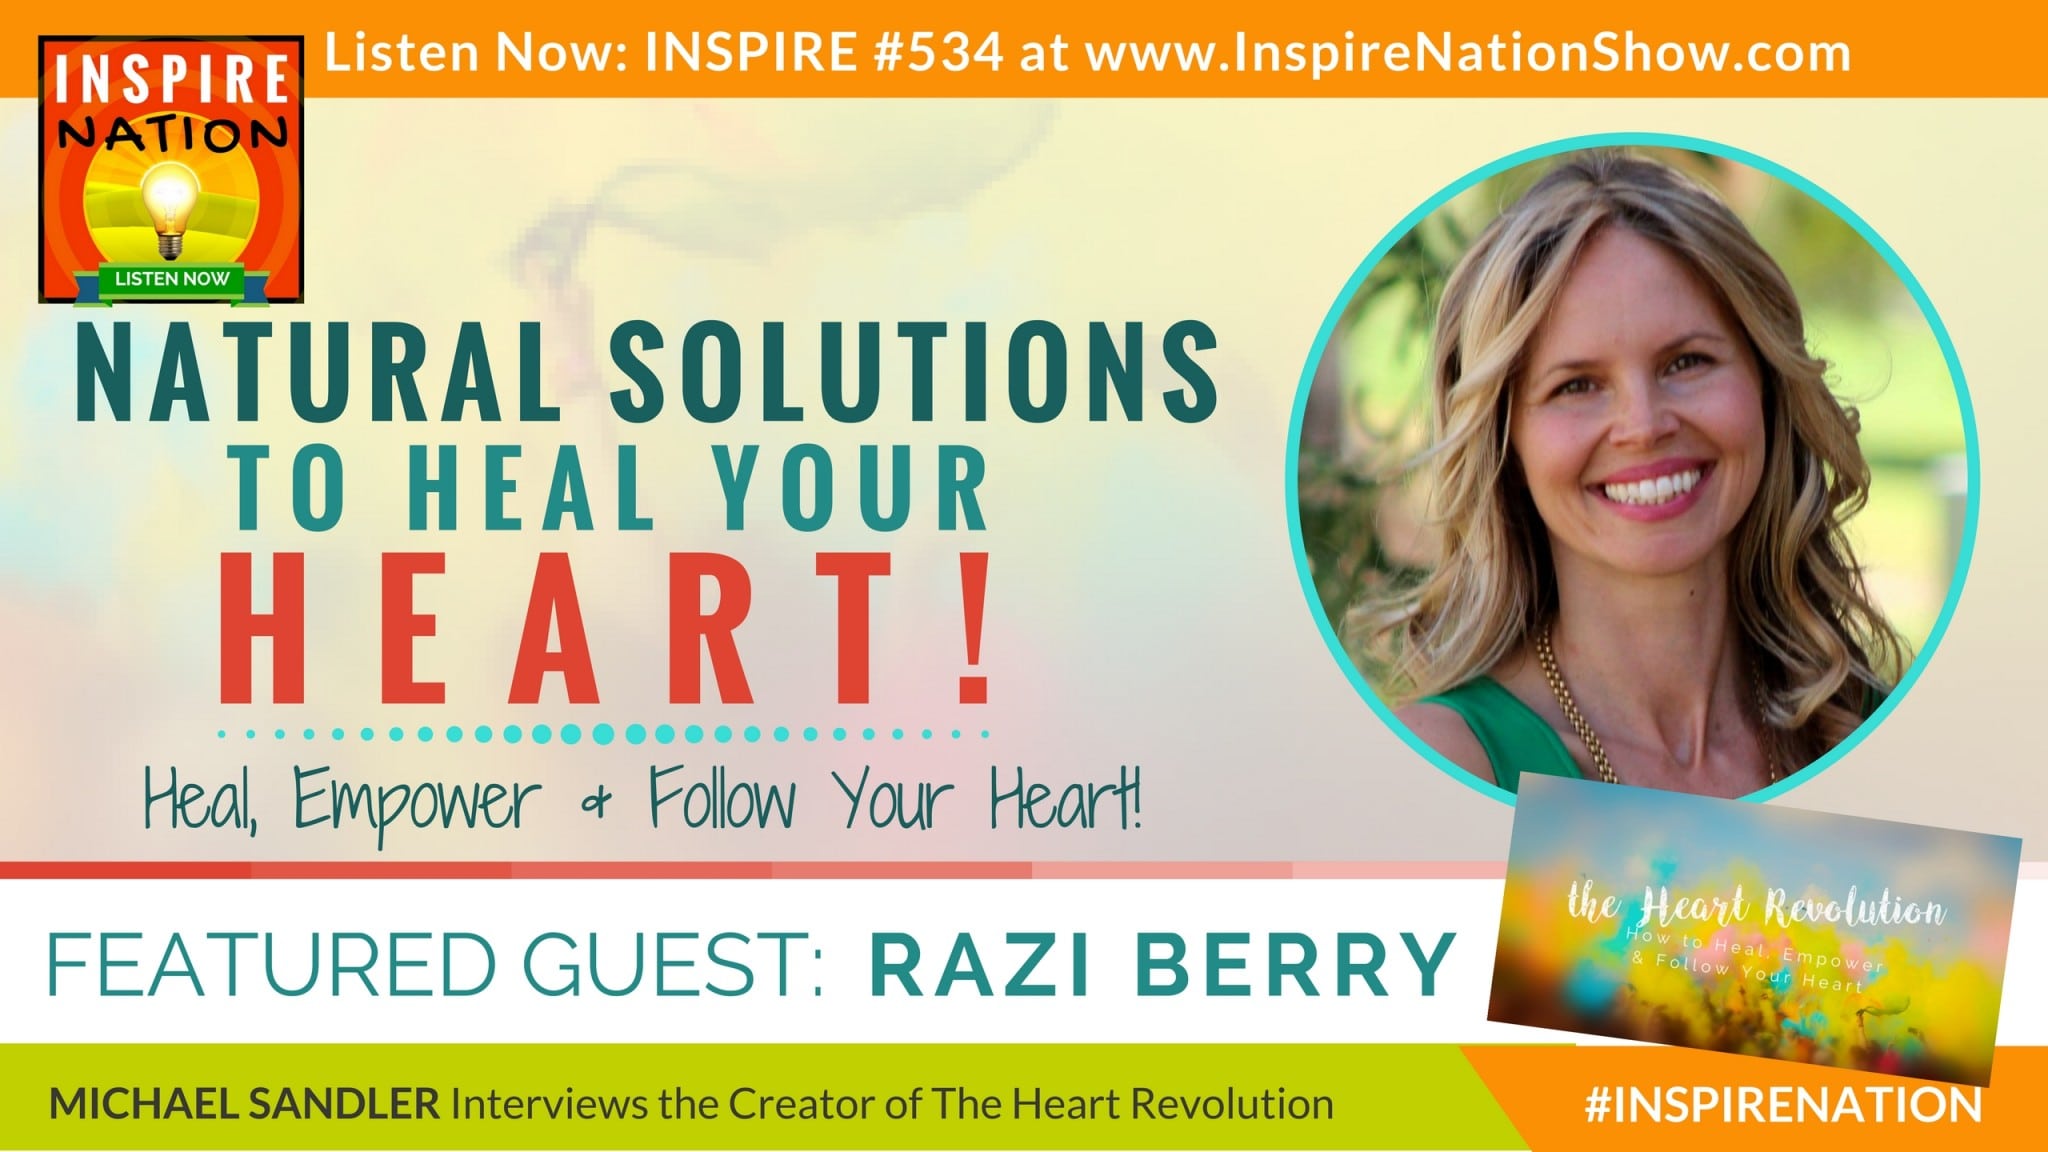 Michael Sandler interview Razi Berry on healiing, empowering and following your heart!